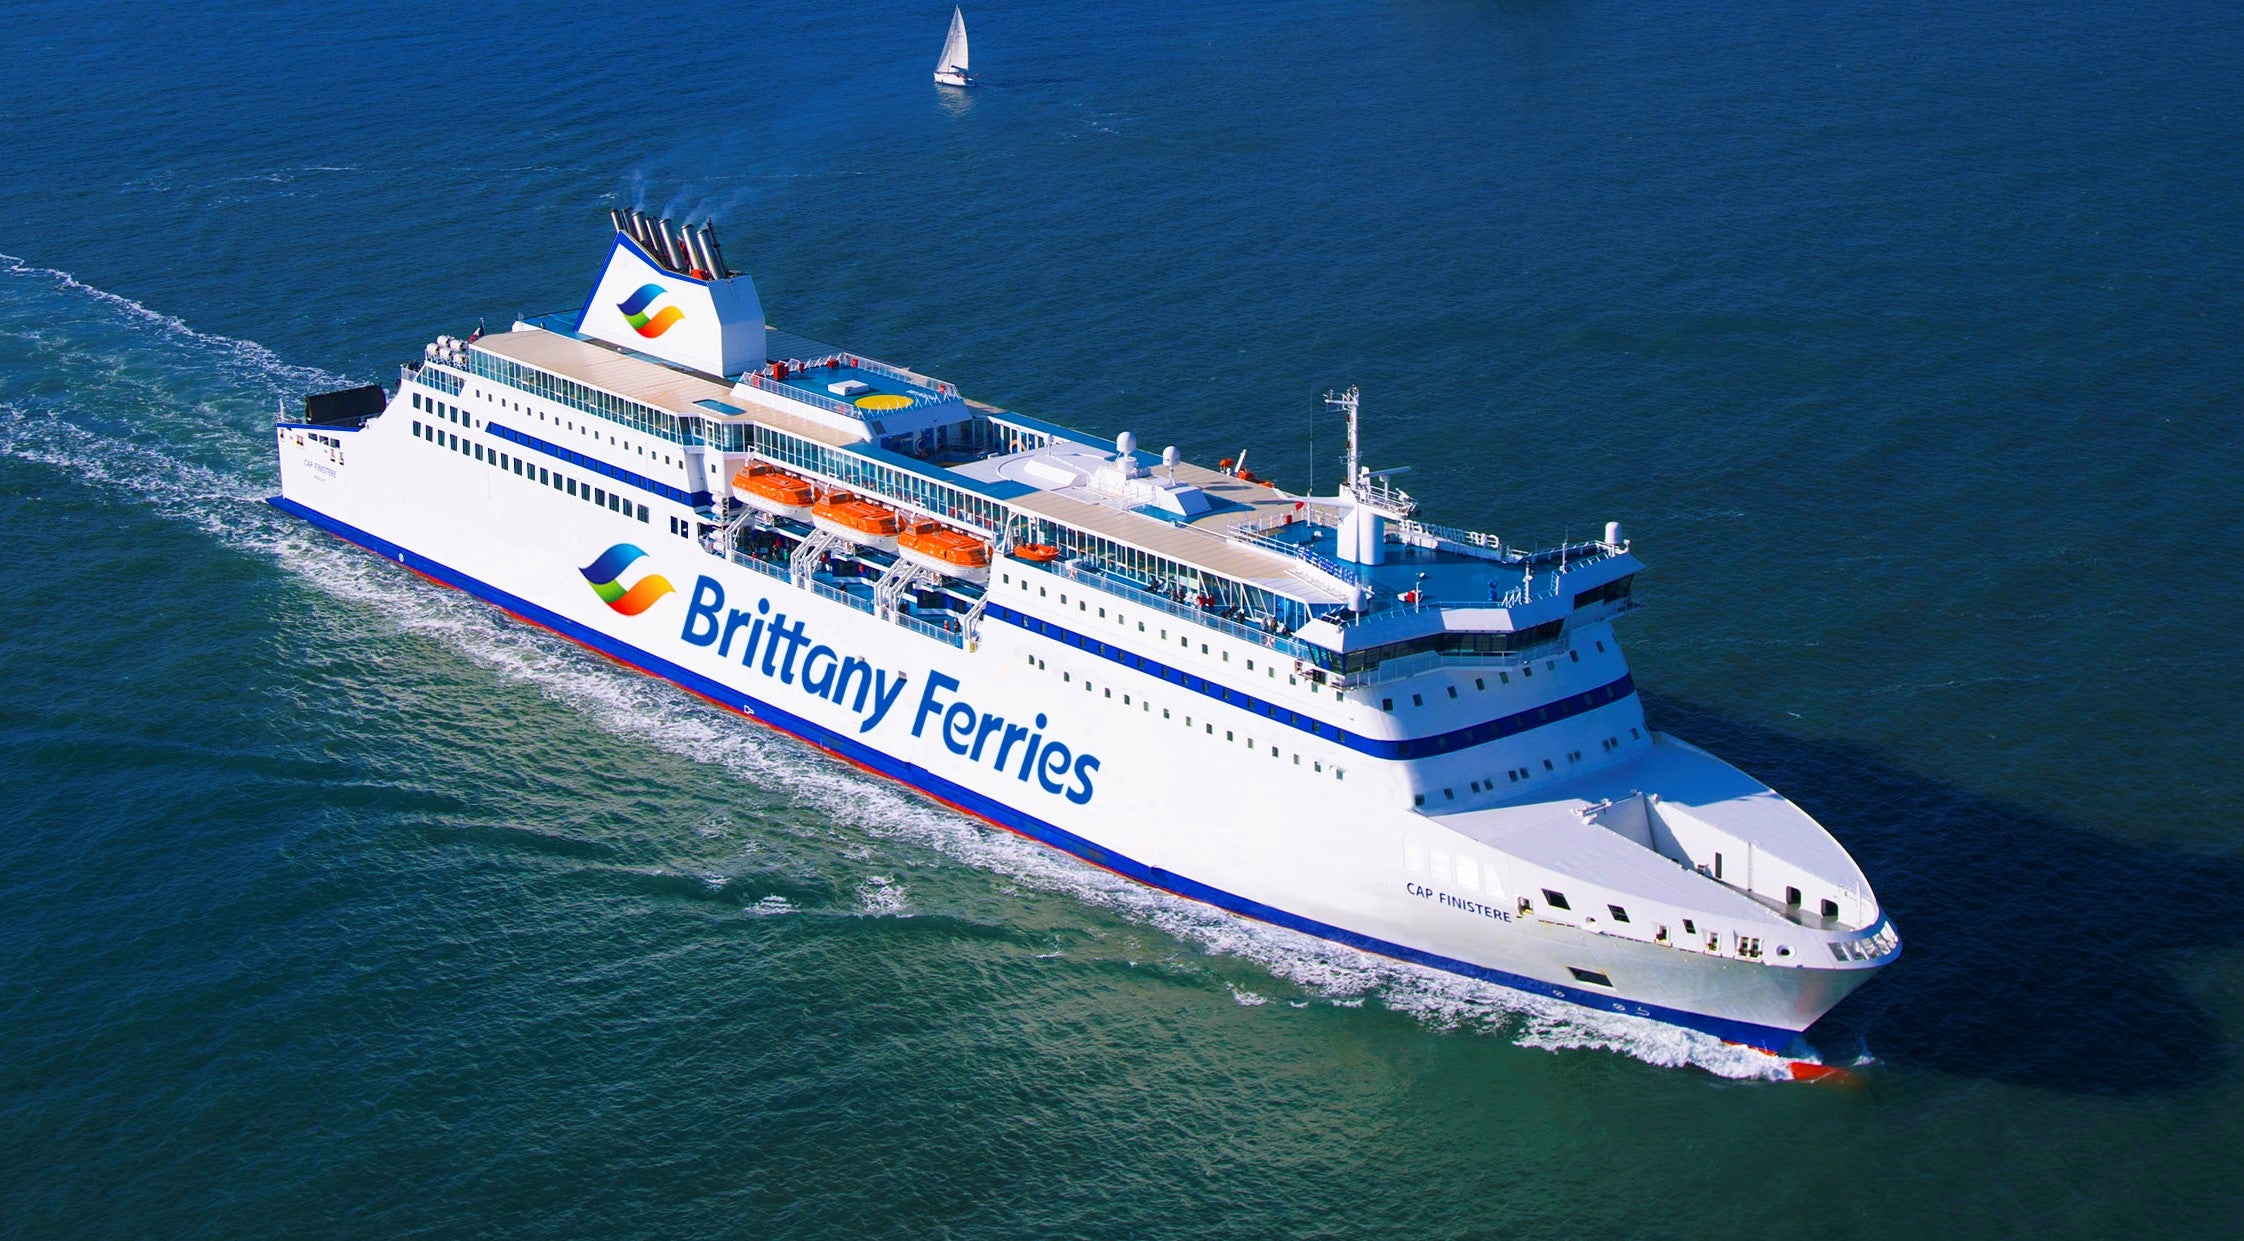 Portugal bound? Cap Finistère, the ship that may be used for a new route from the UK